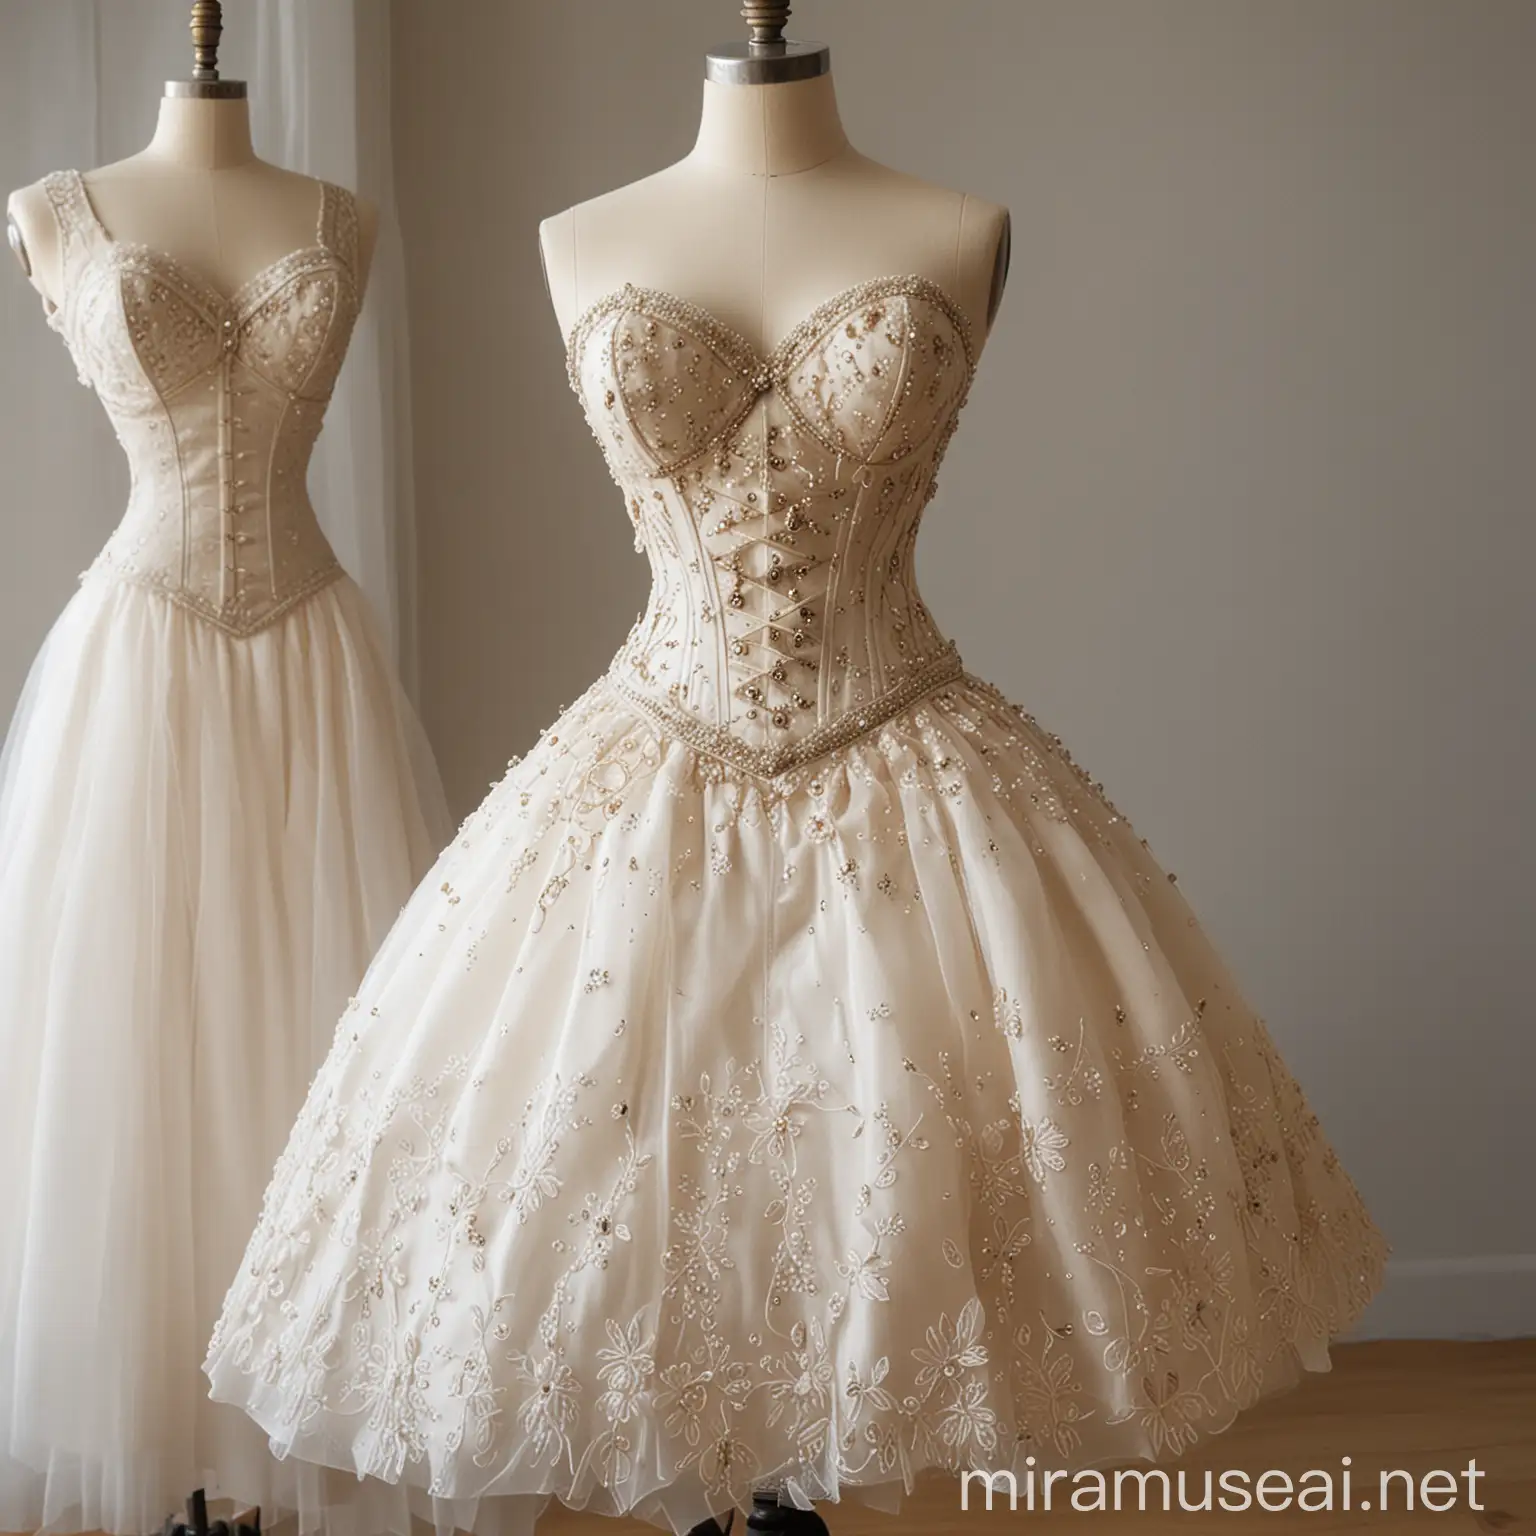 Elegant Quinceaera Dress Displayed in Fashion Studio with Sewing Tools